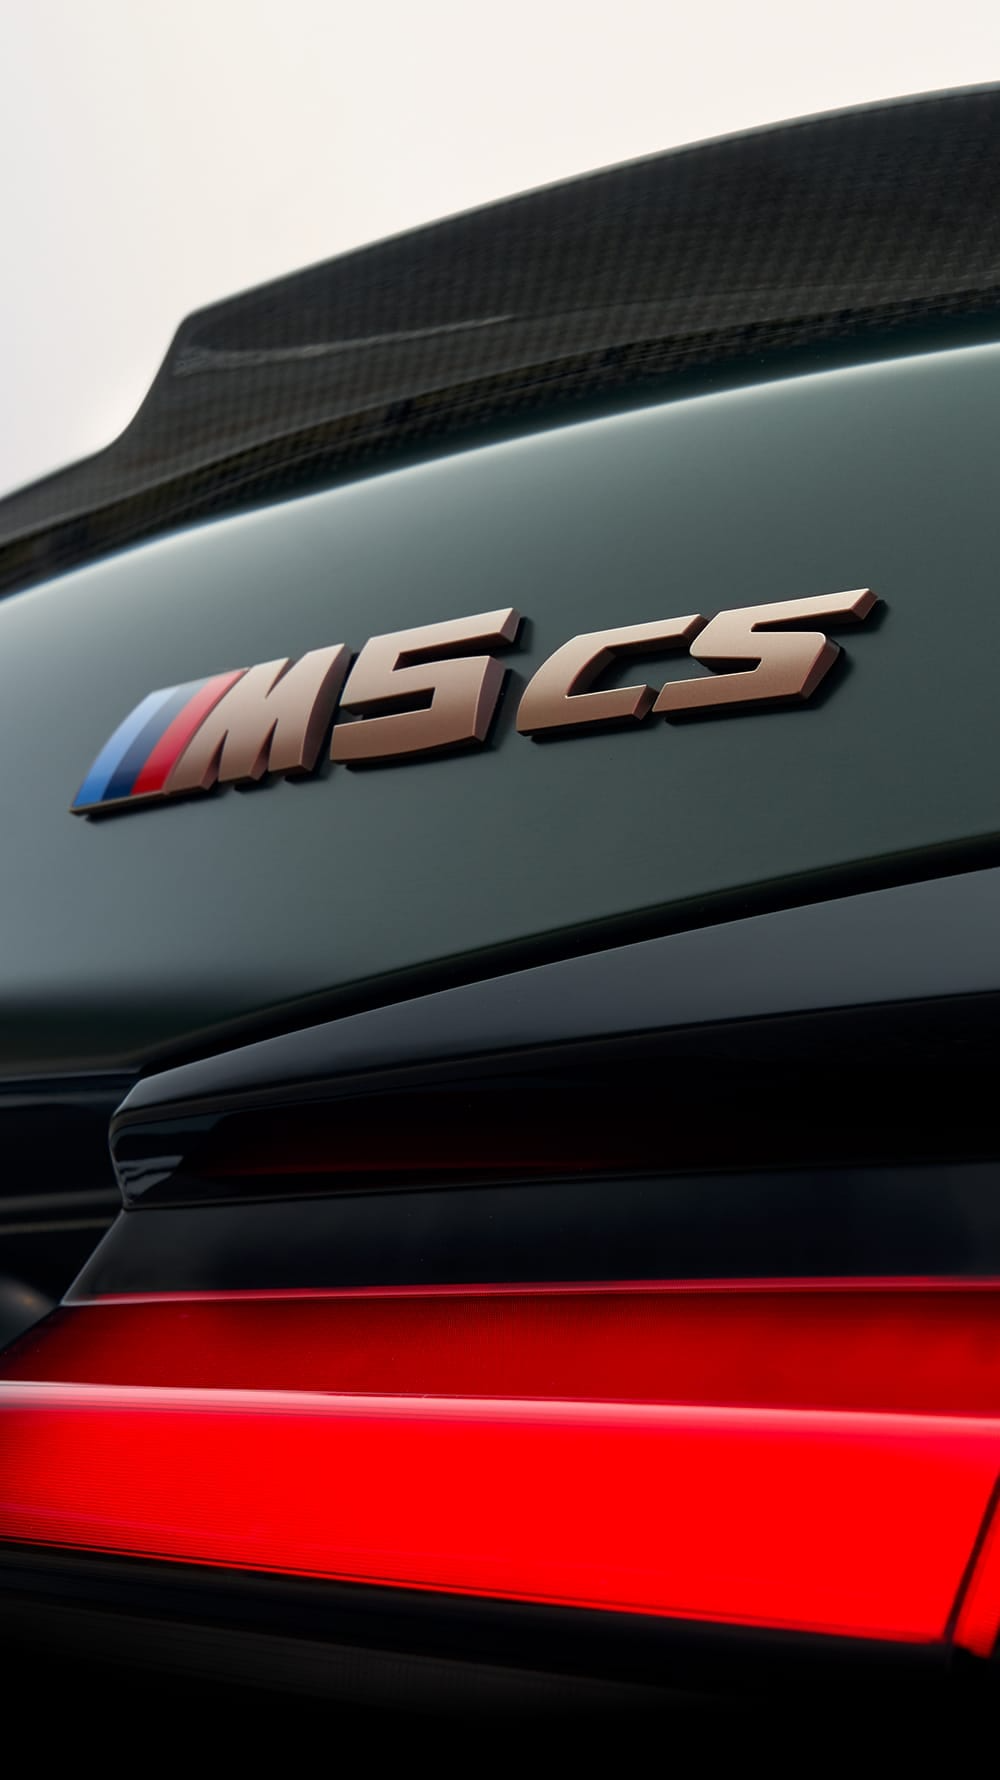 500-HP BMW M5 Masterpiece Is Unlike Any Other